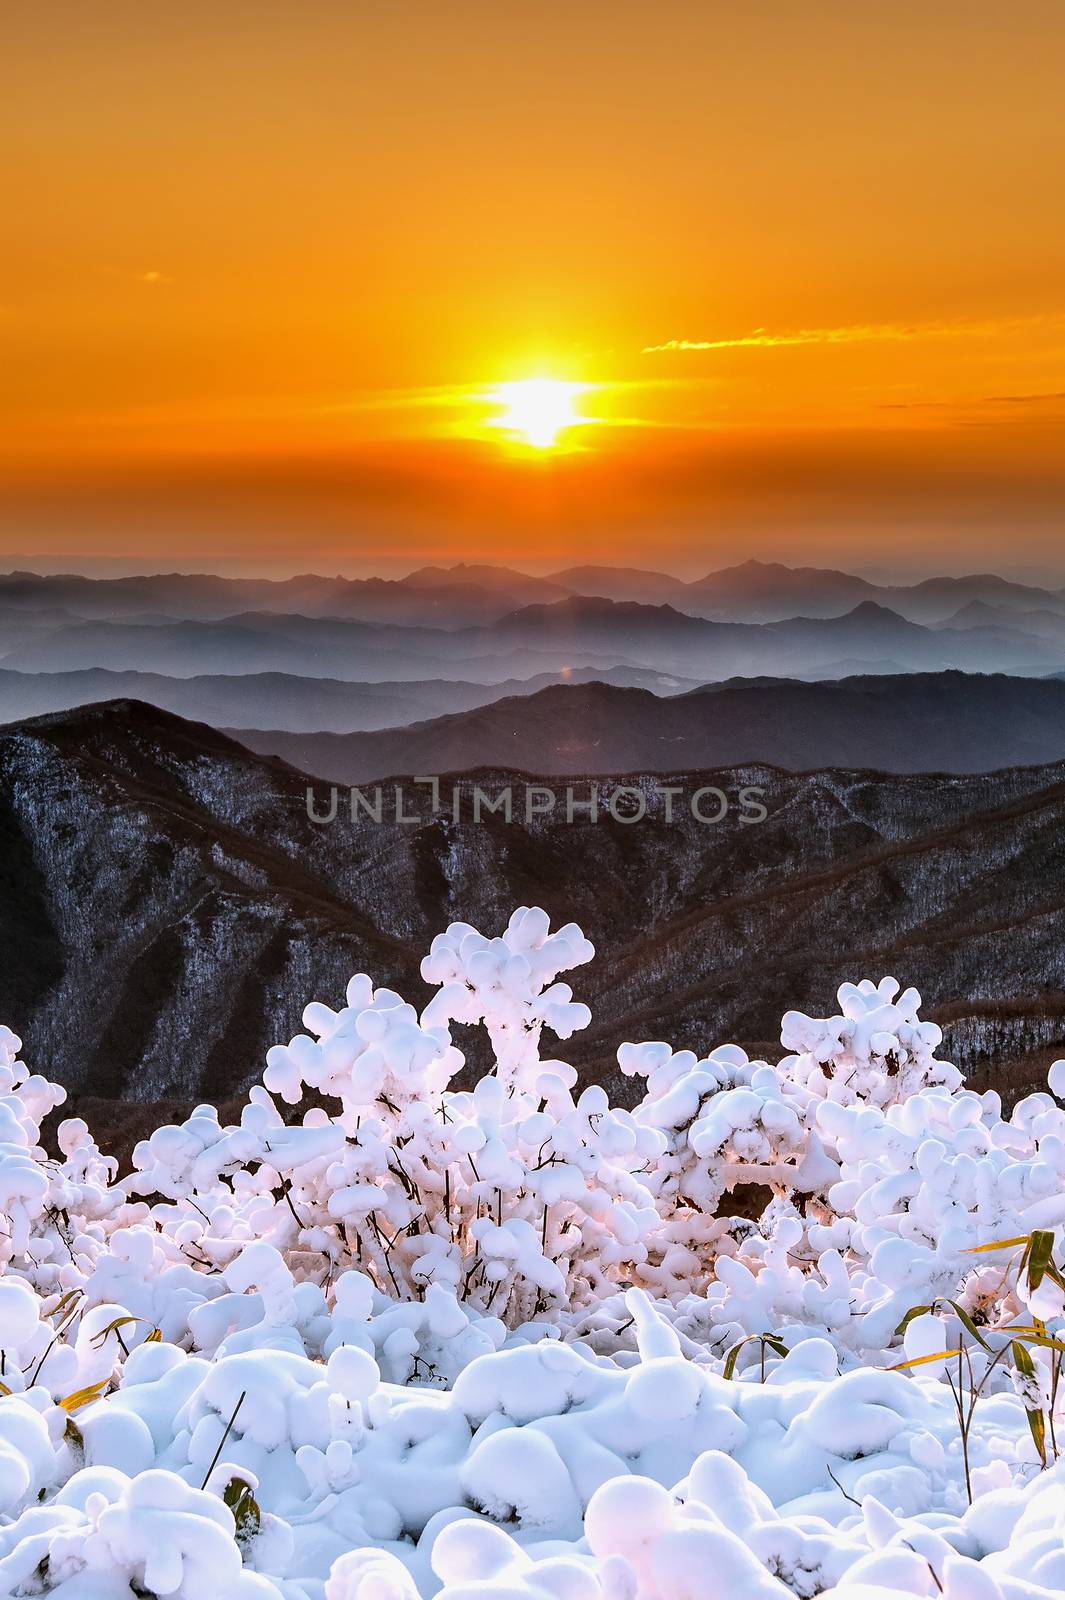 Beautiful sunrise on Deogyusan mountains covered with snow in winter,South Korea. by gutarphotoghaphy